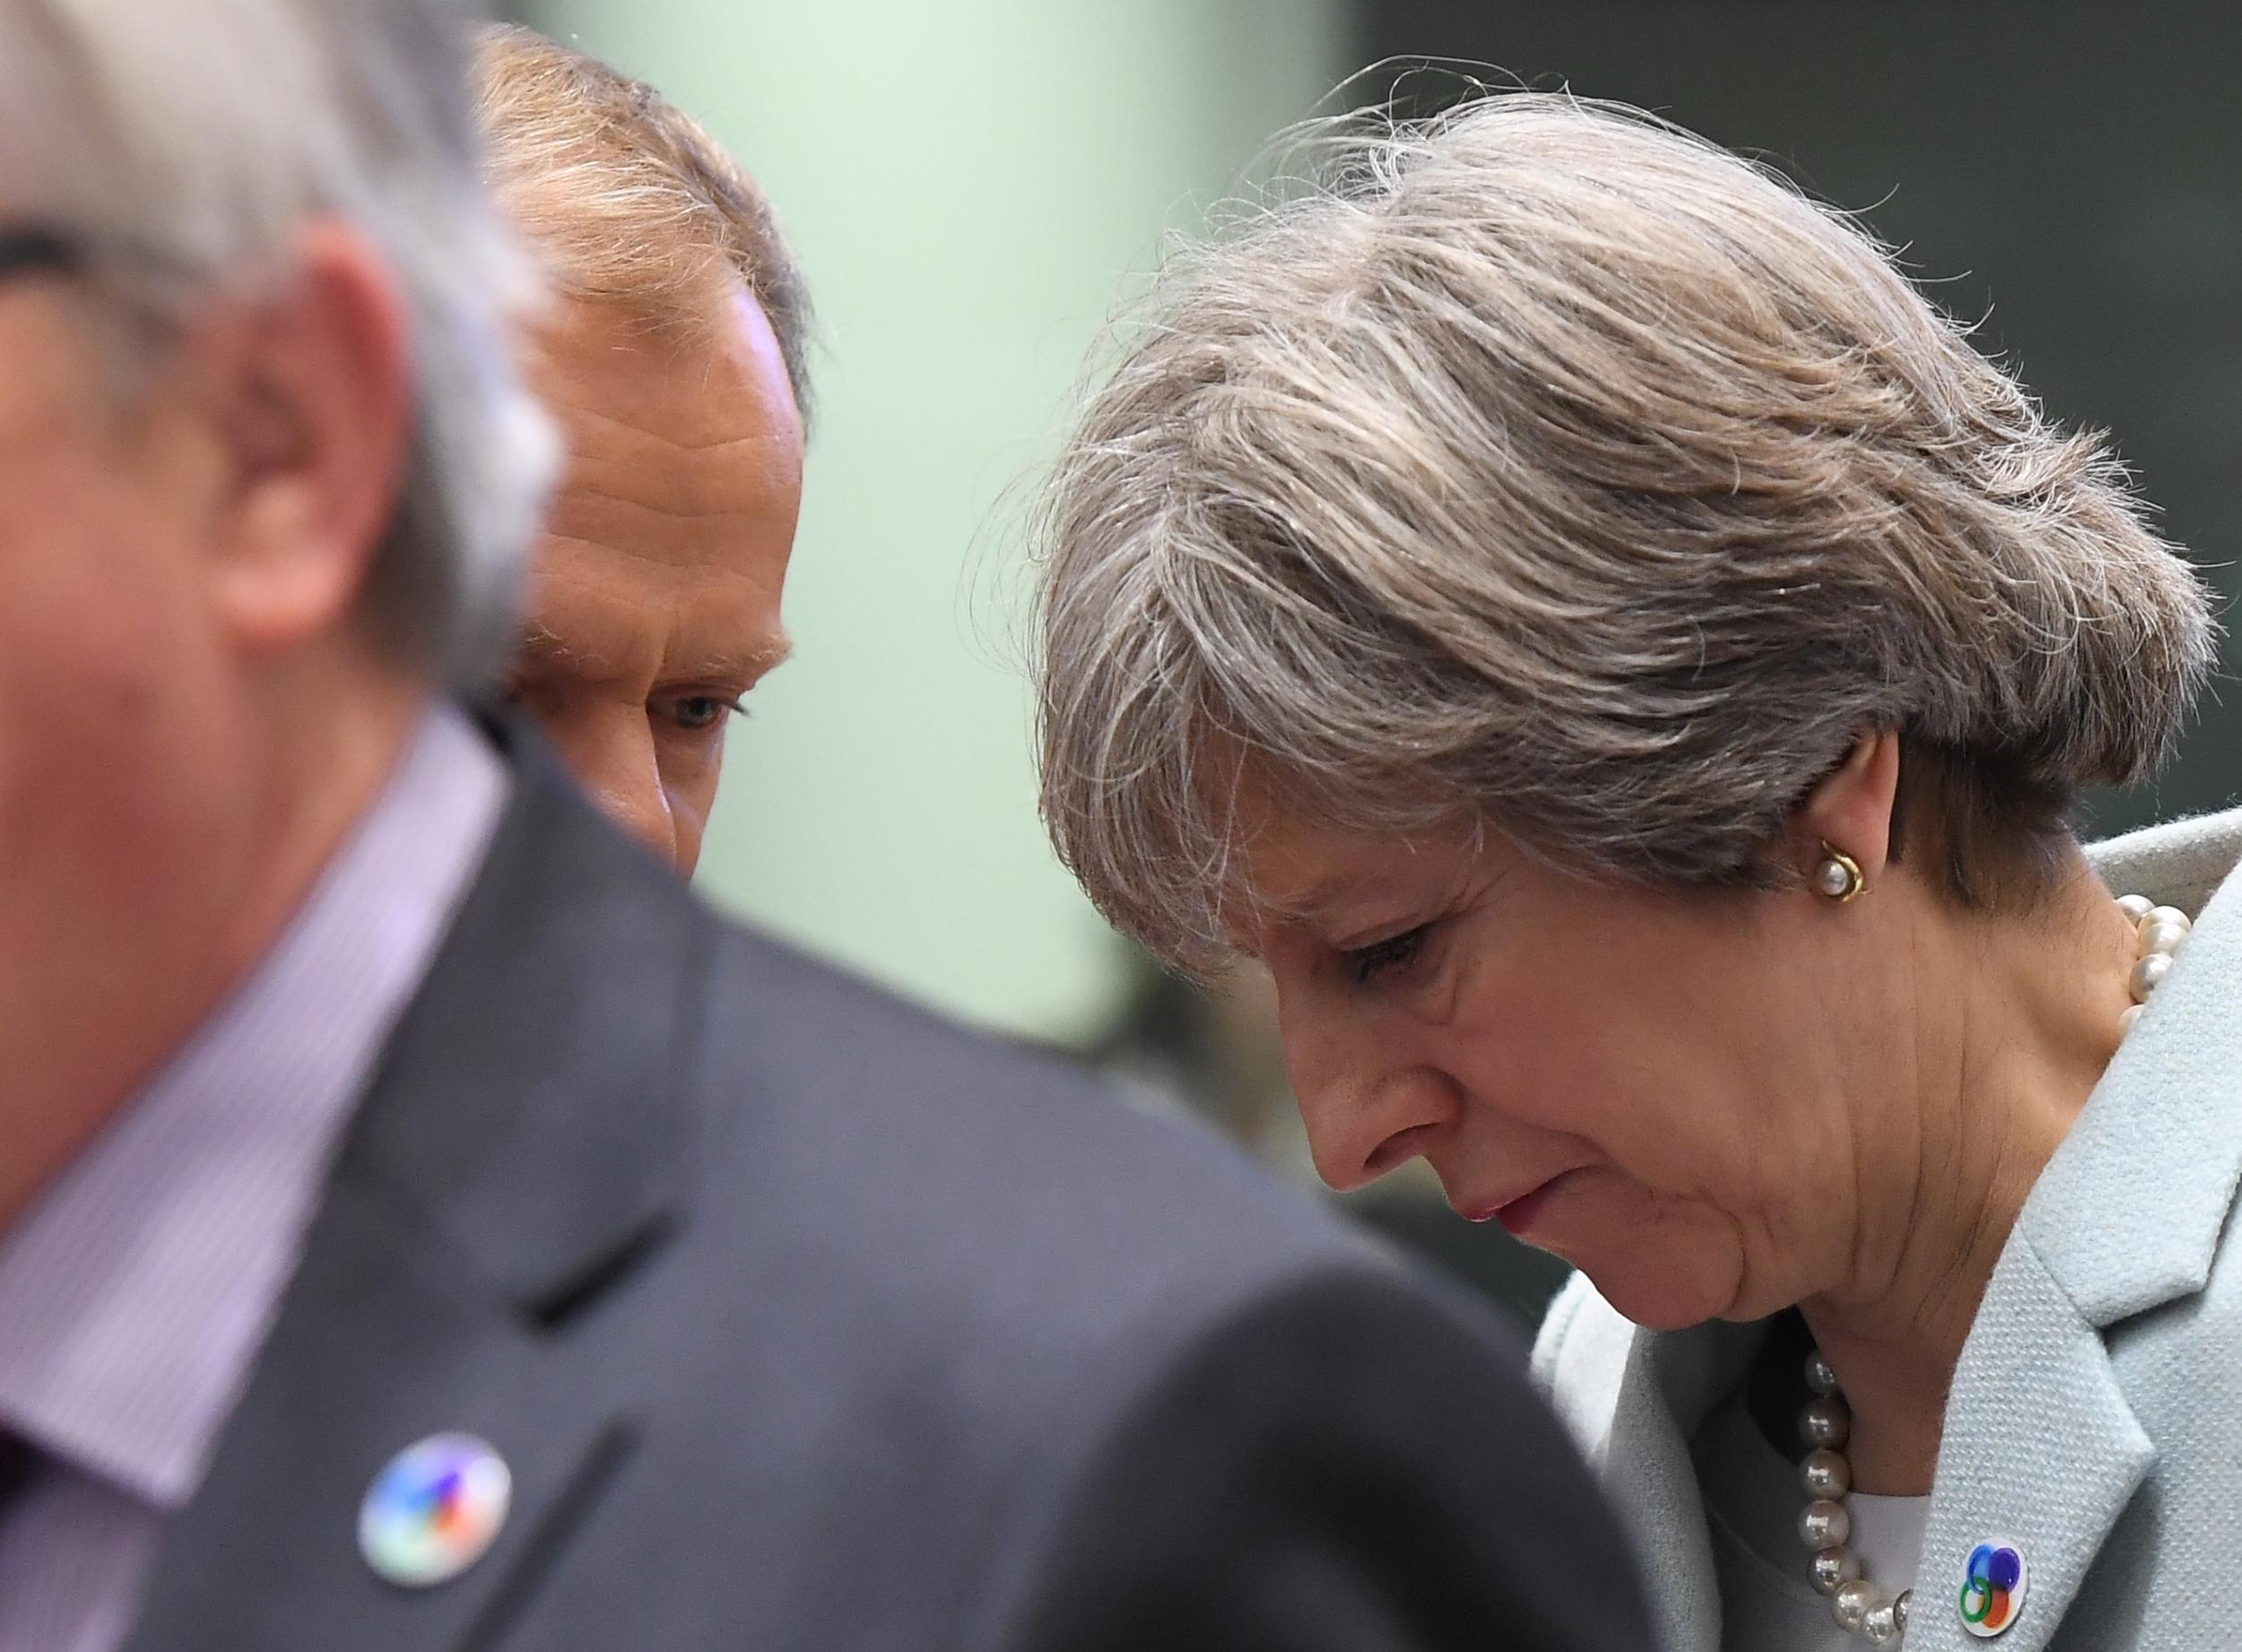 A poll of leaders’ satisfaction ratings saw Theresa May hit minus 30 (35 per cent satisfied, and 65 per cent dissatisfied)